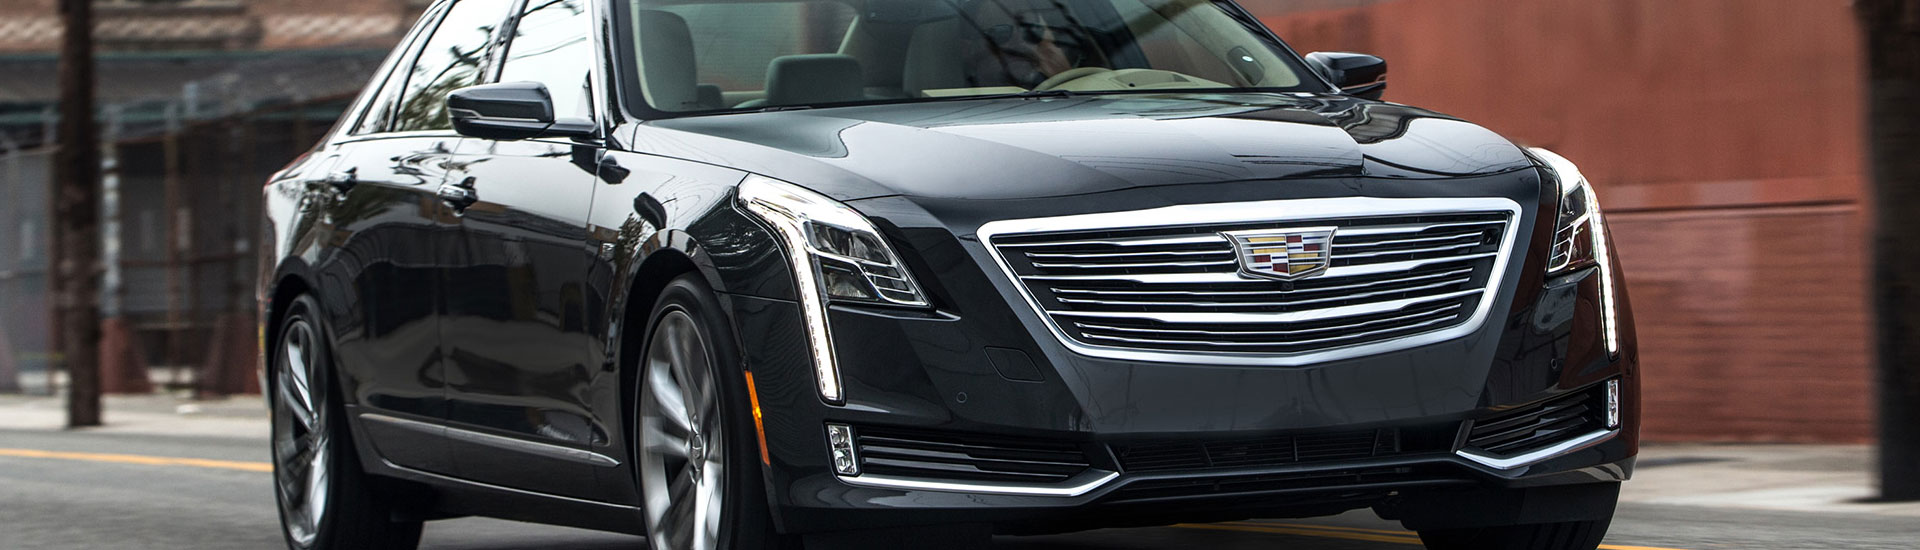 Cadillac Aftermarket Accessories & Tints